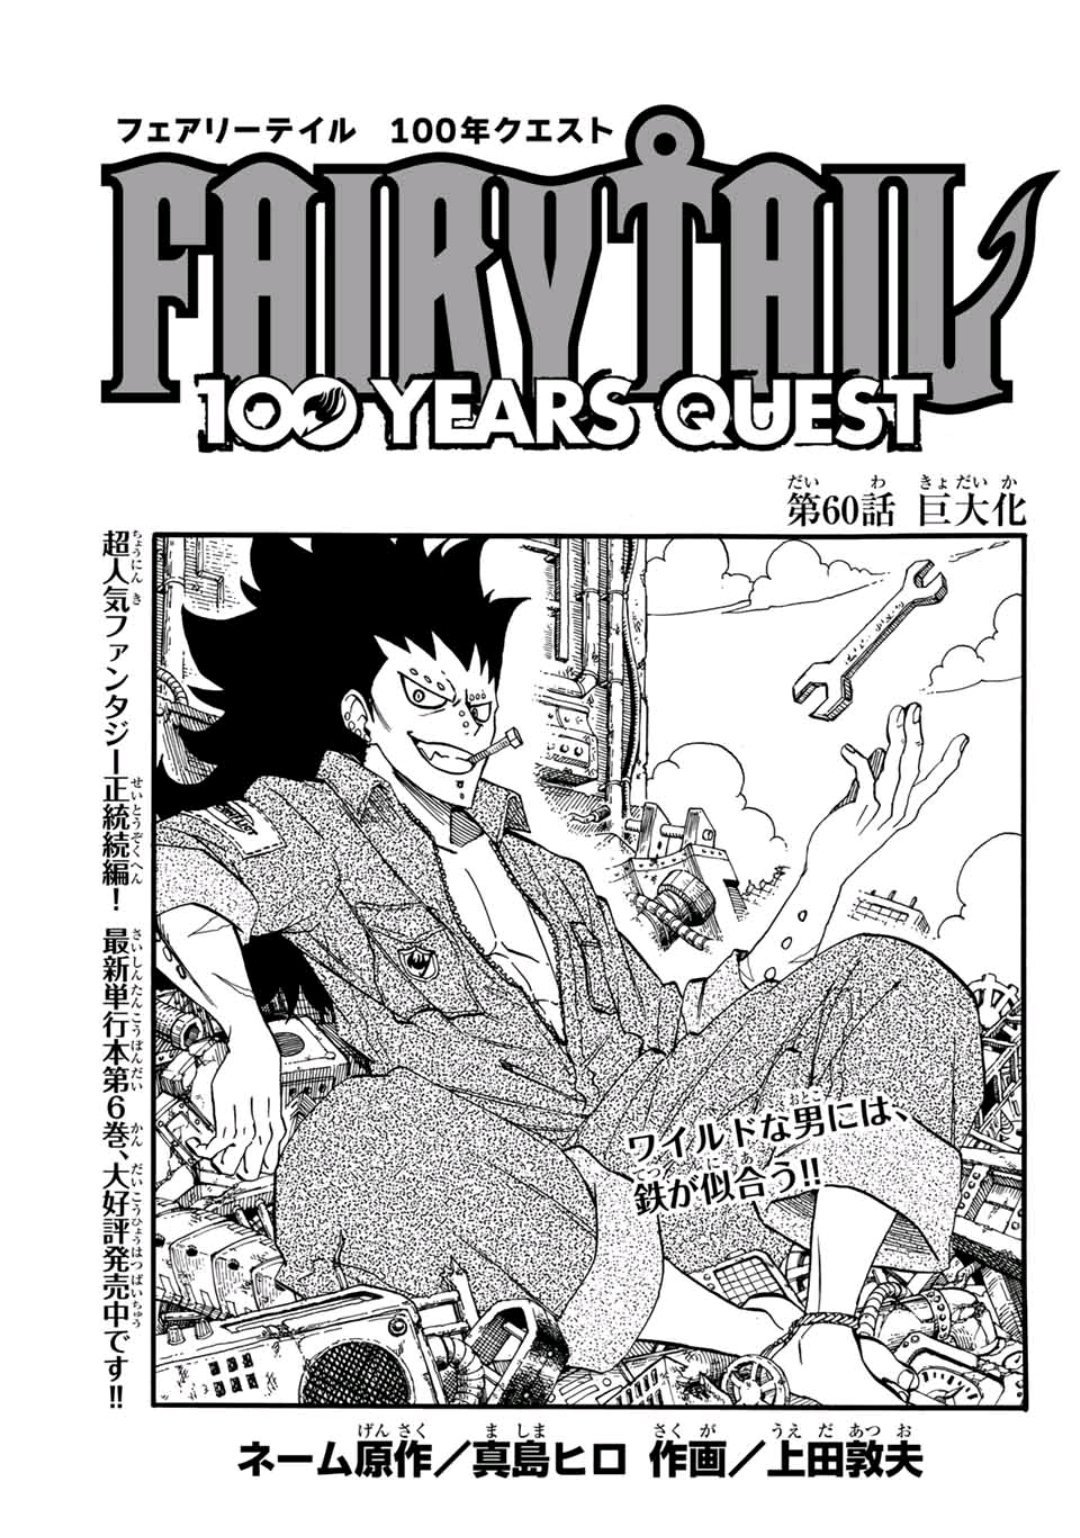 Fairy Tail: 100 Years Quest manga: Where to read, what to expect, and more